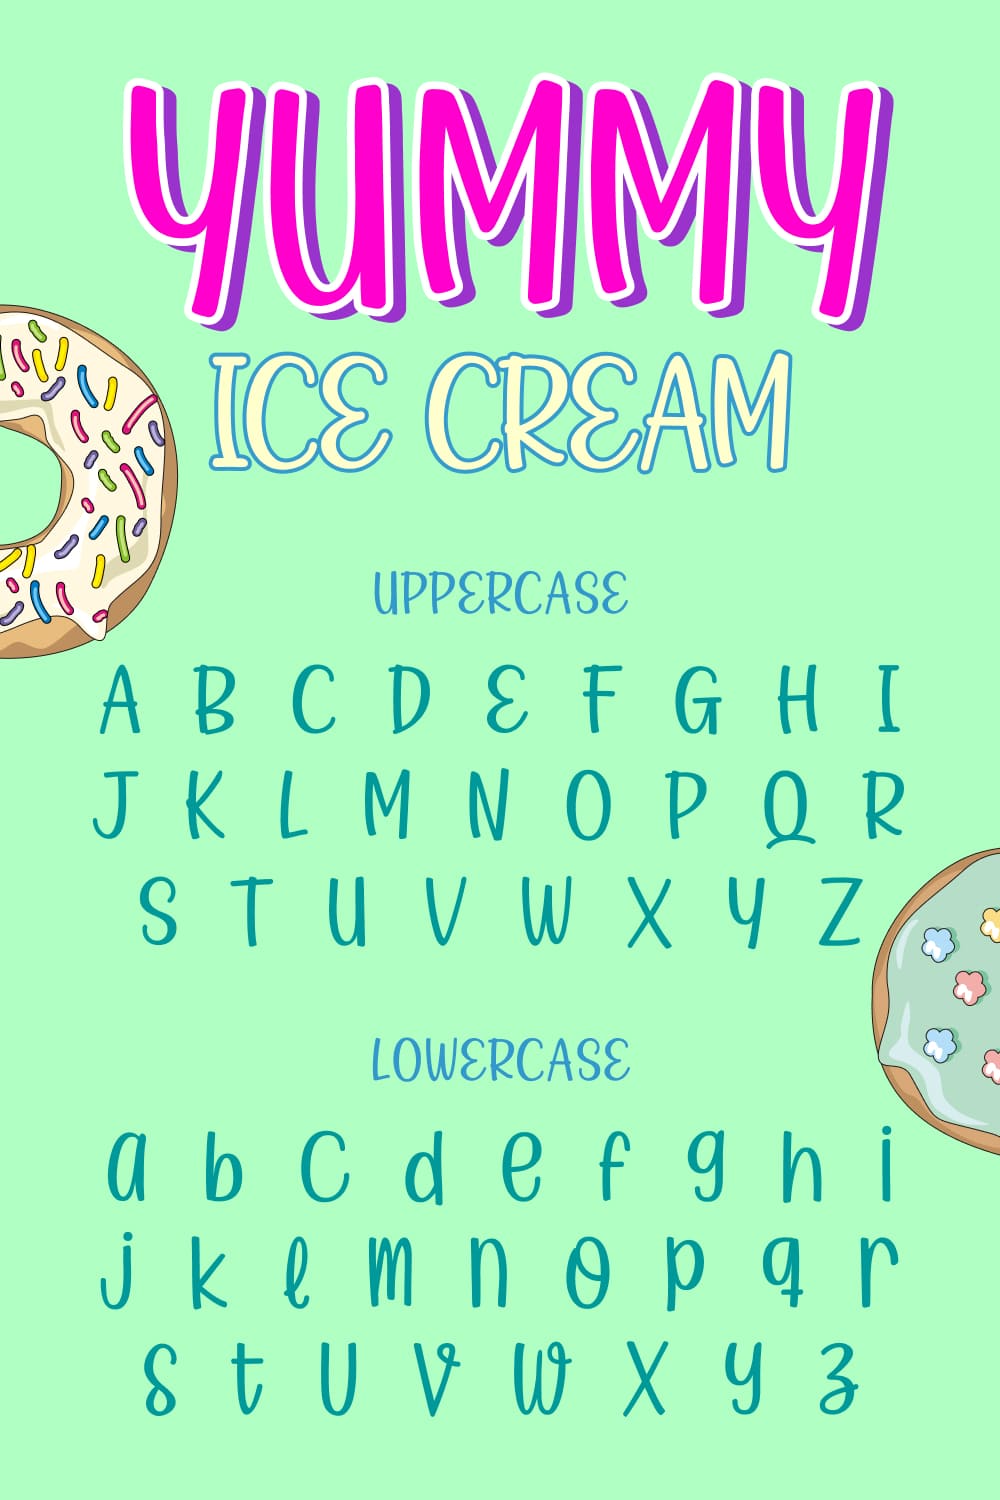 Yummy Ice Cream Free Font MasterBundles Pinterest uppercase and lowercase preview.